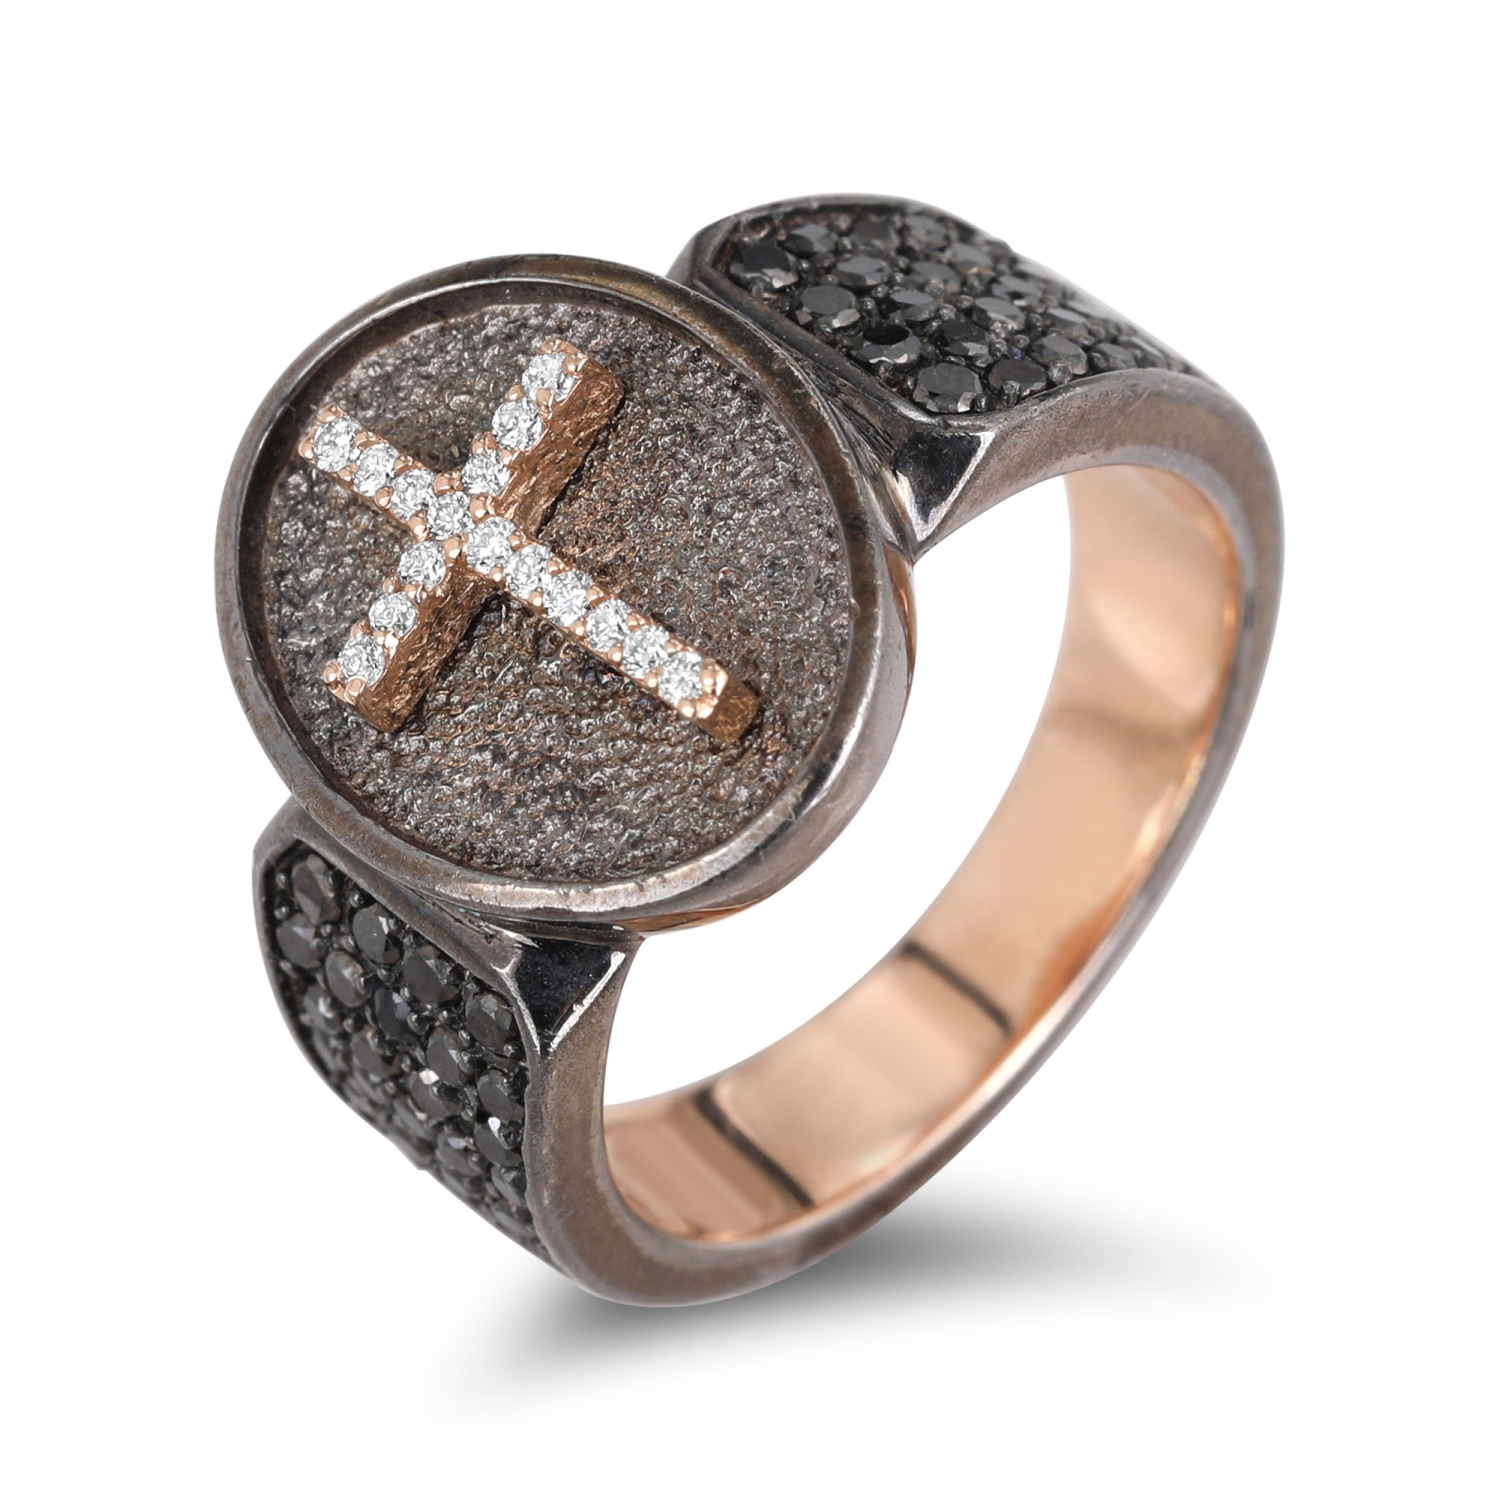 14K Red Gold Plated Black Rhodium Roman Cross Signet Ring with White and Black Diamonds - 2